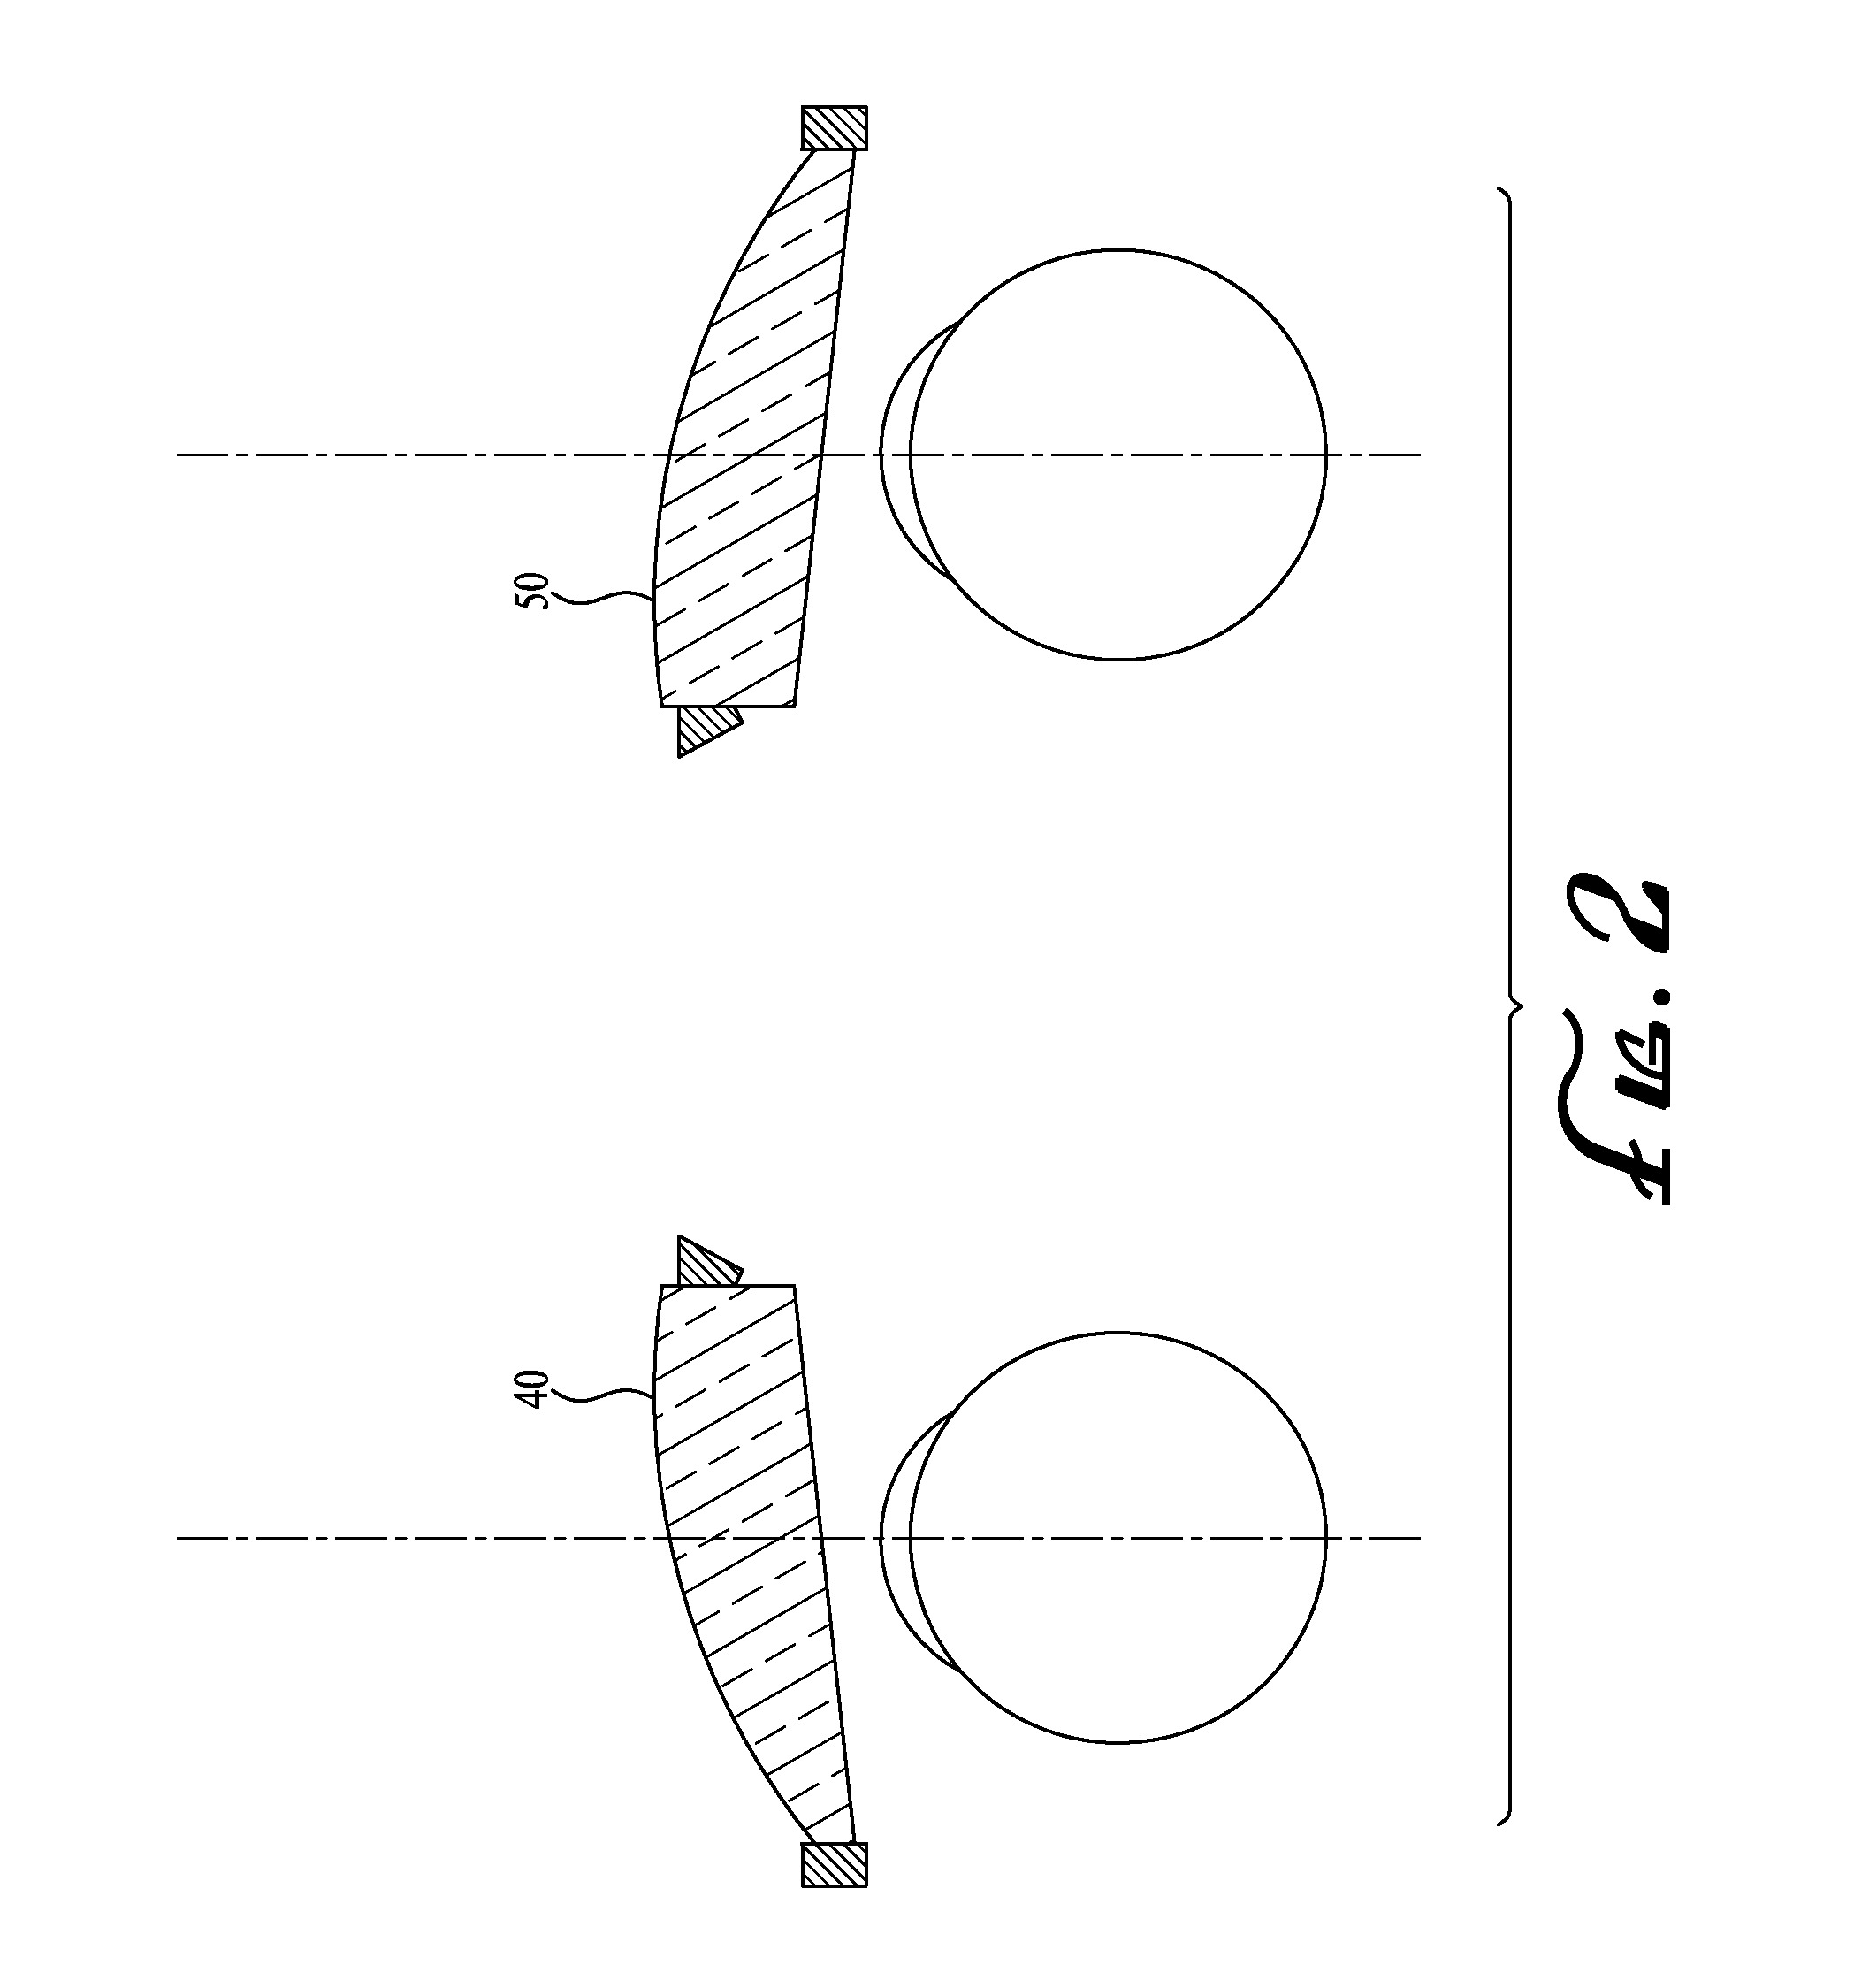 Method and Device for Treating Averted Gaze